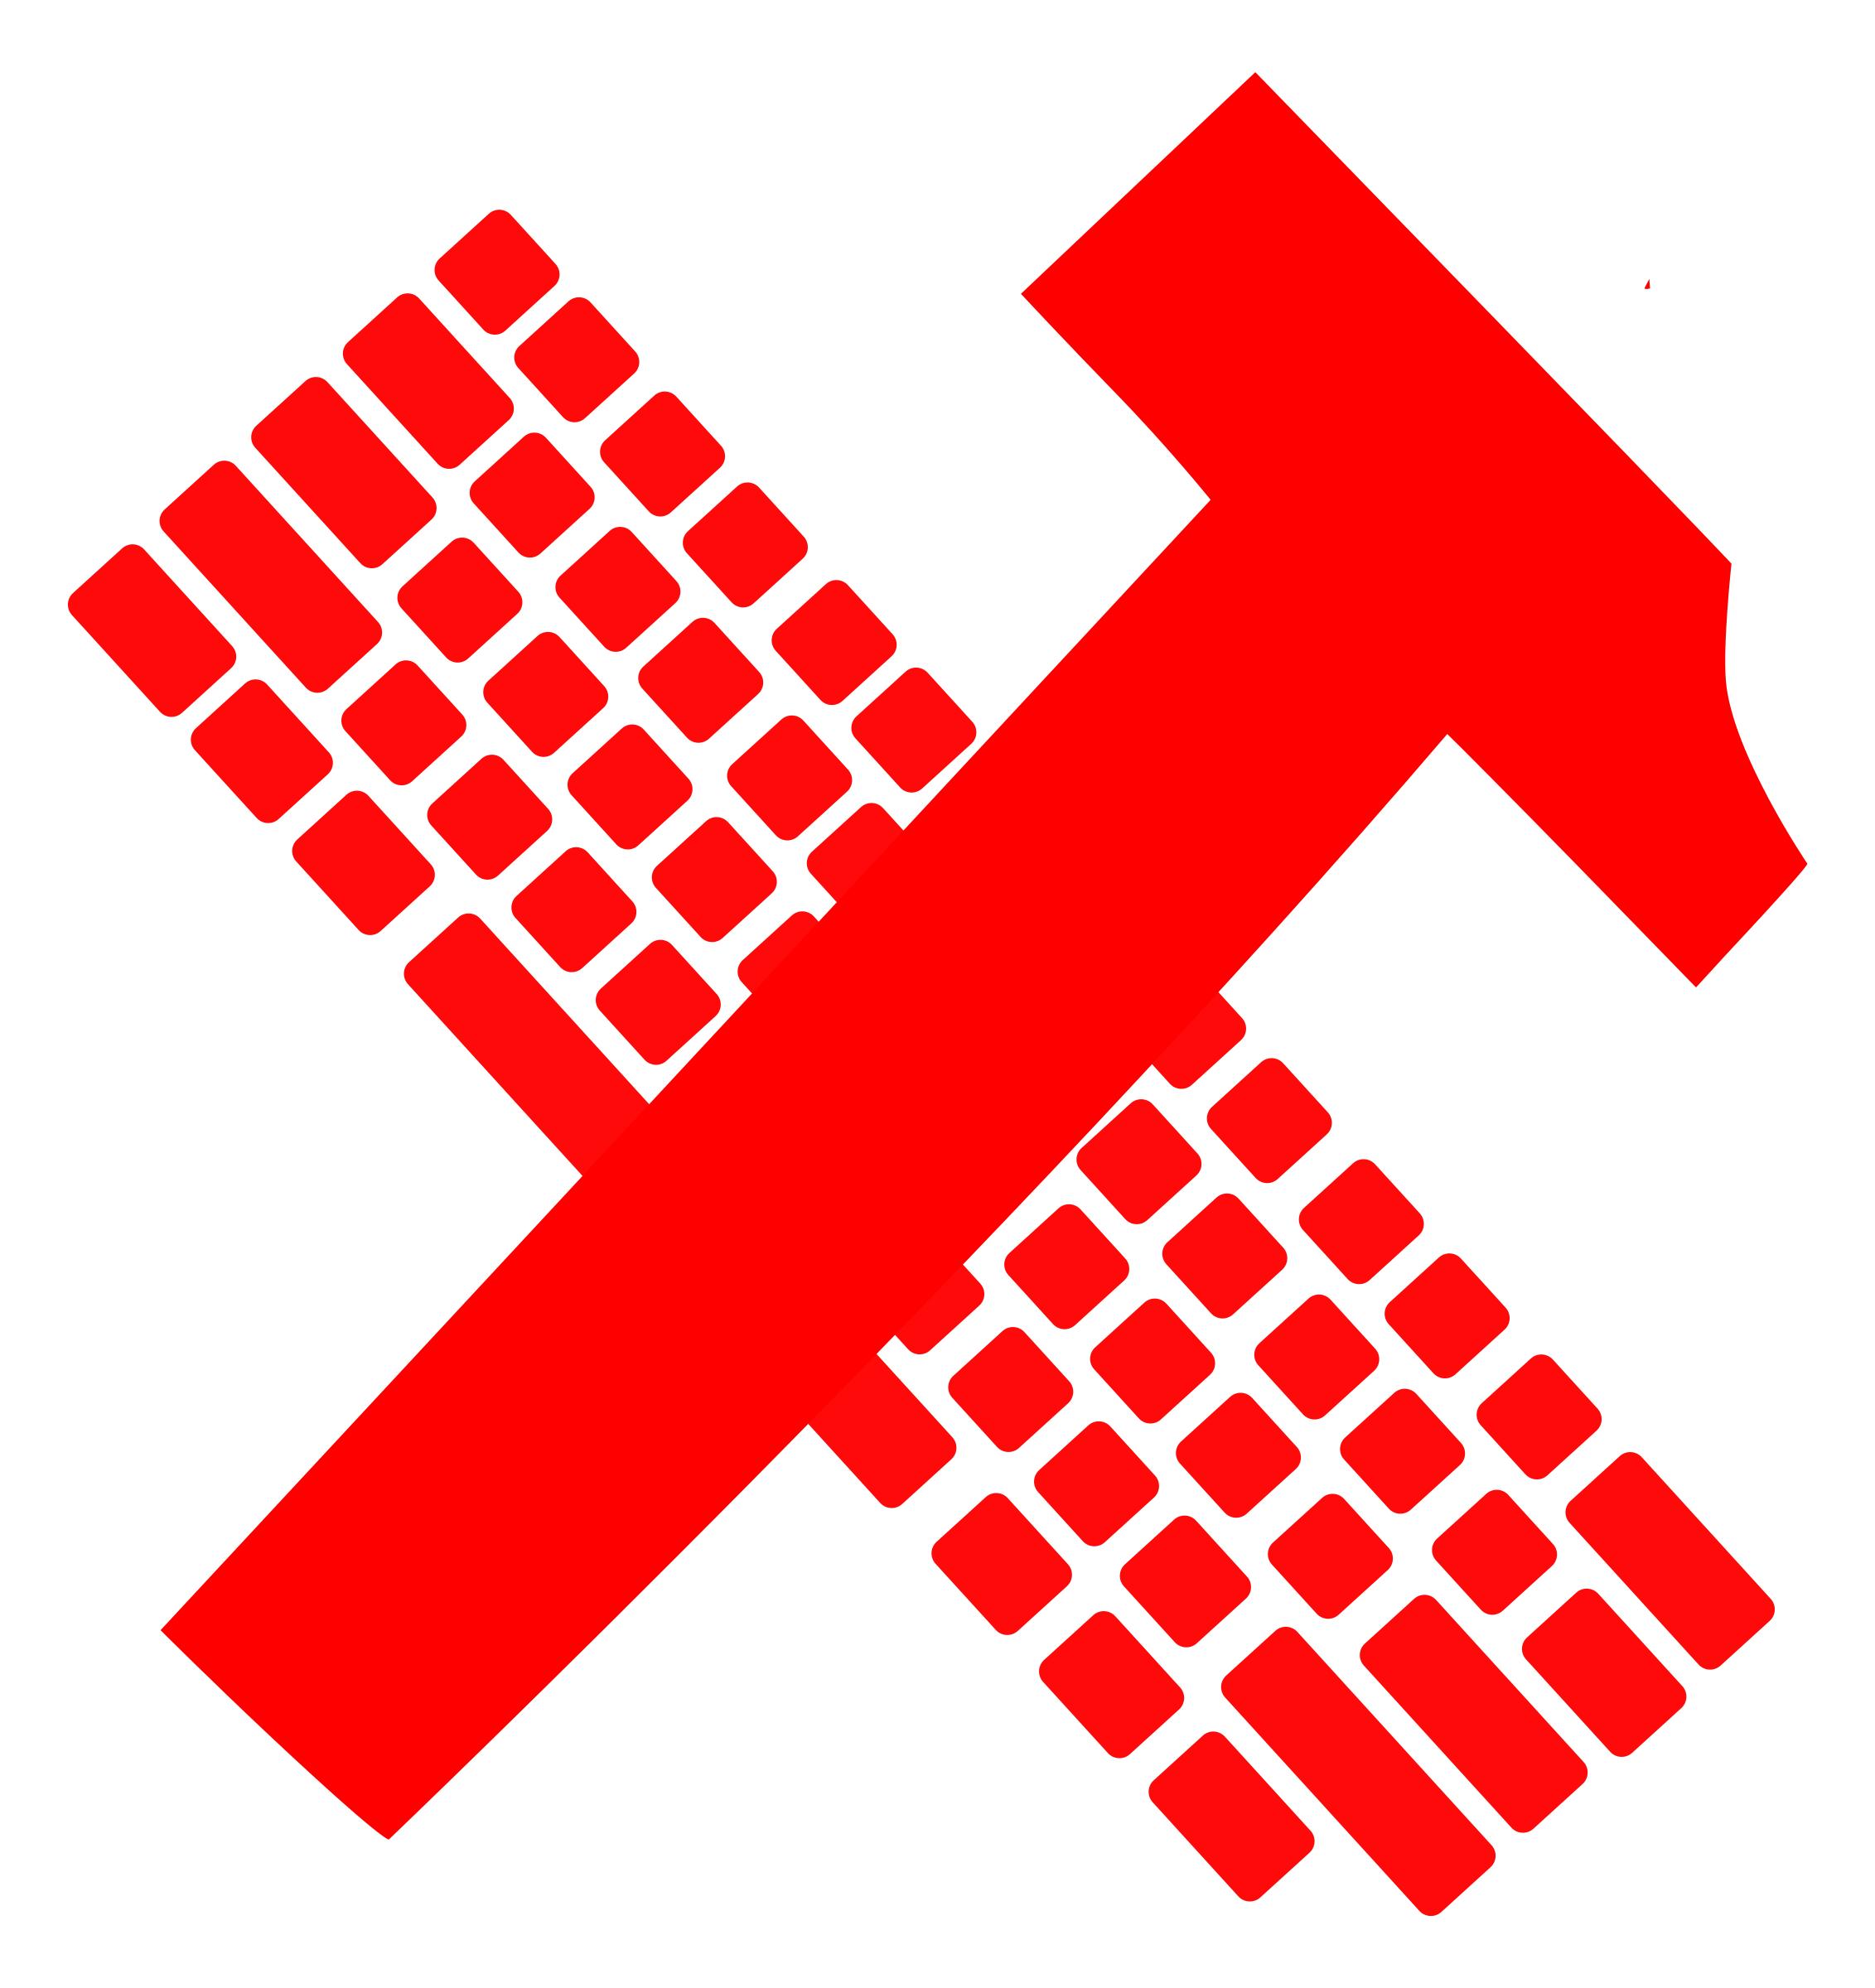 hammer and keyboard - proletariat png